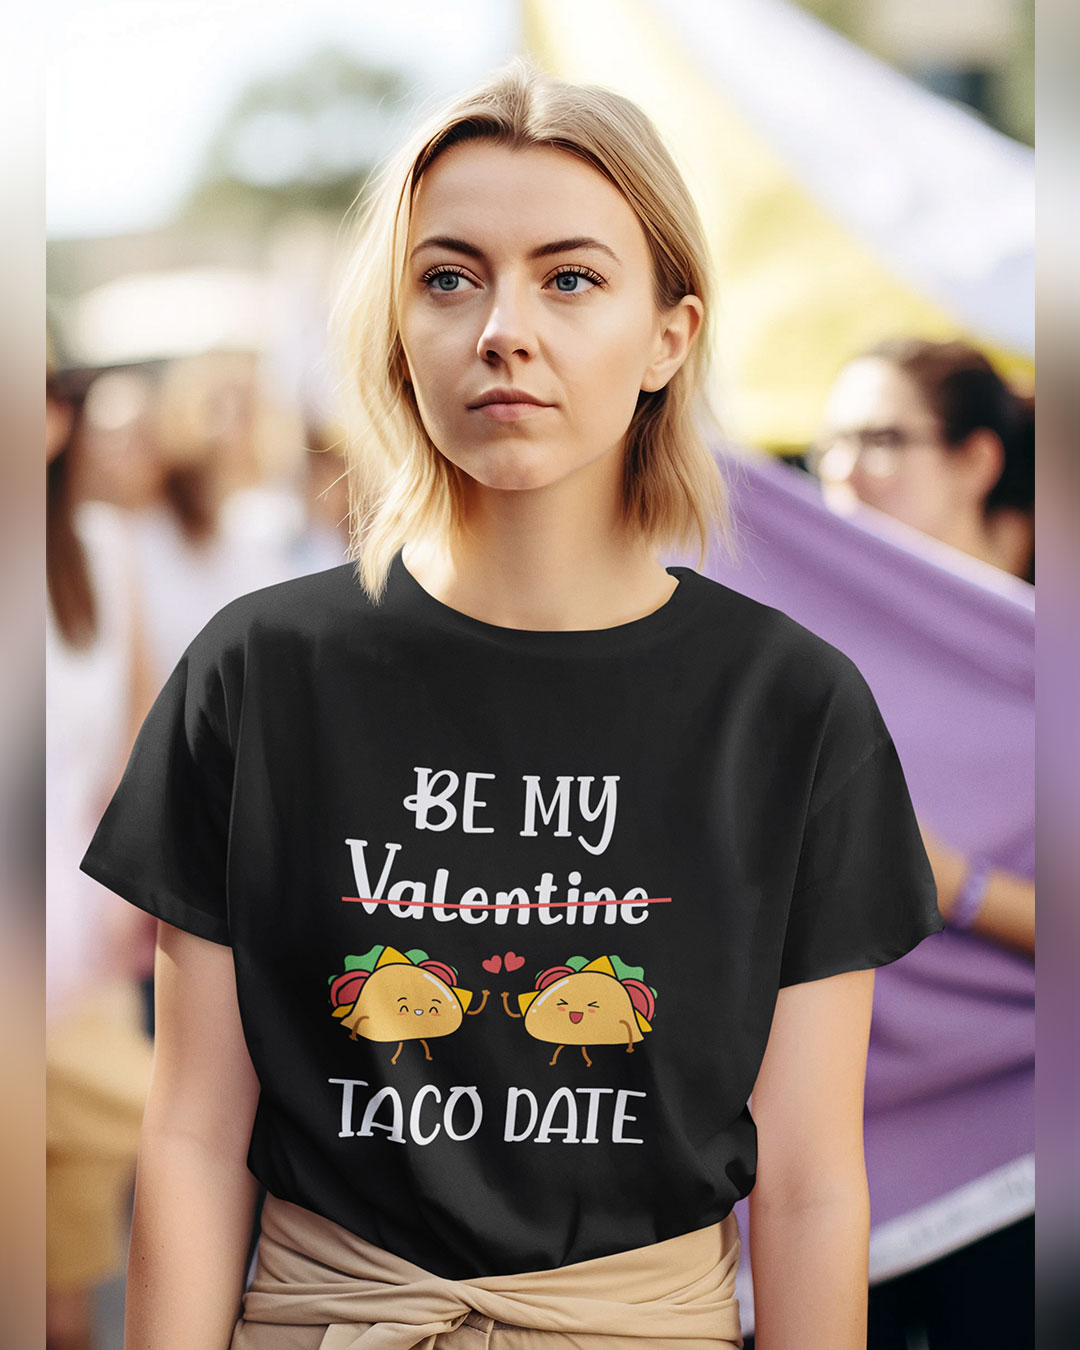 Can You Be My Taco Date T-shirt For Women For Valentine's Day